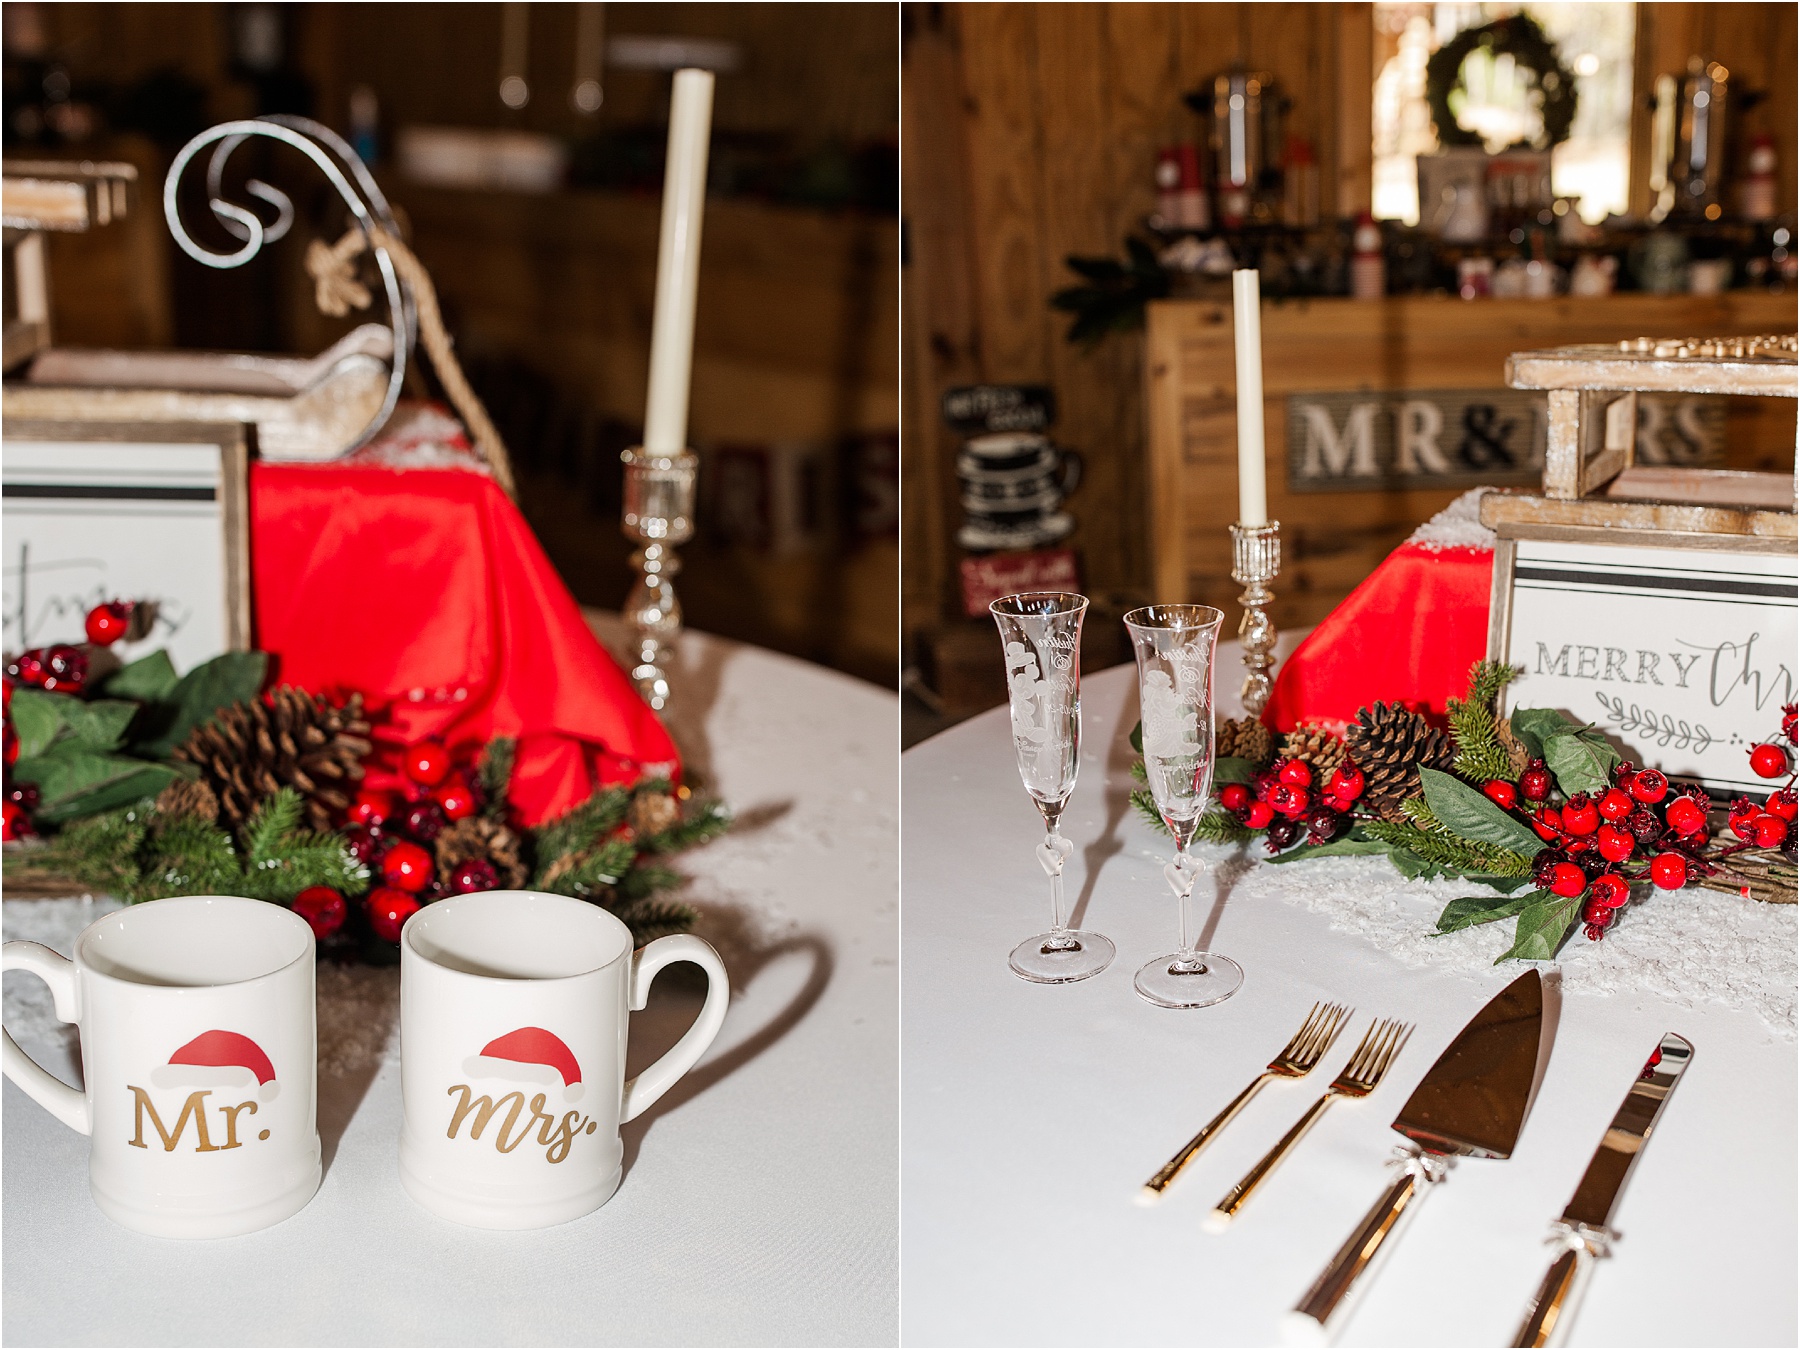 Christmas place setting decorations at a wedding reception